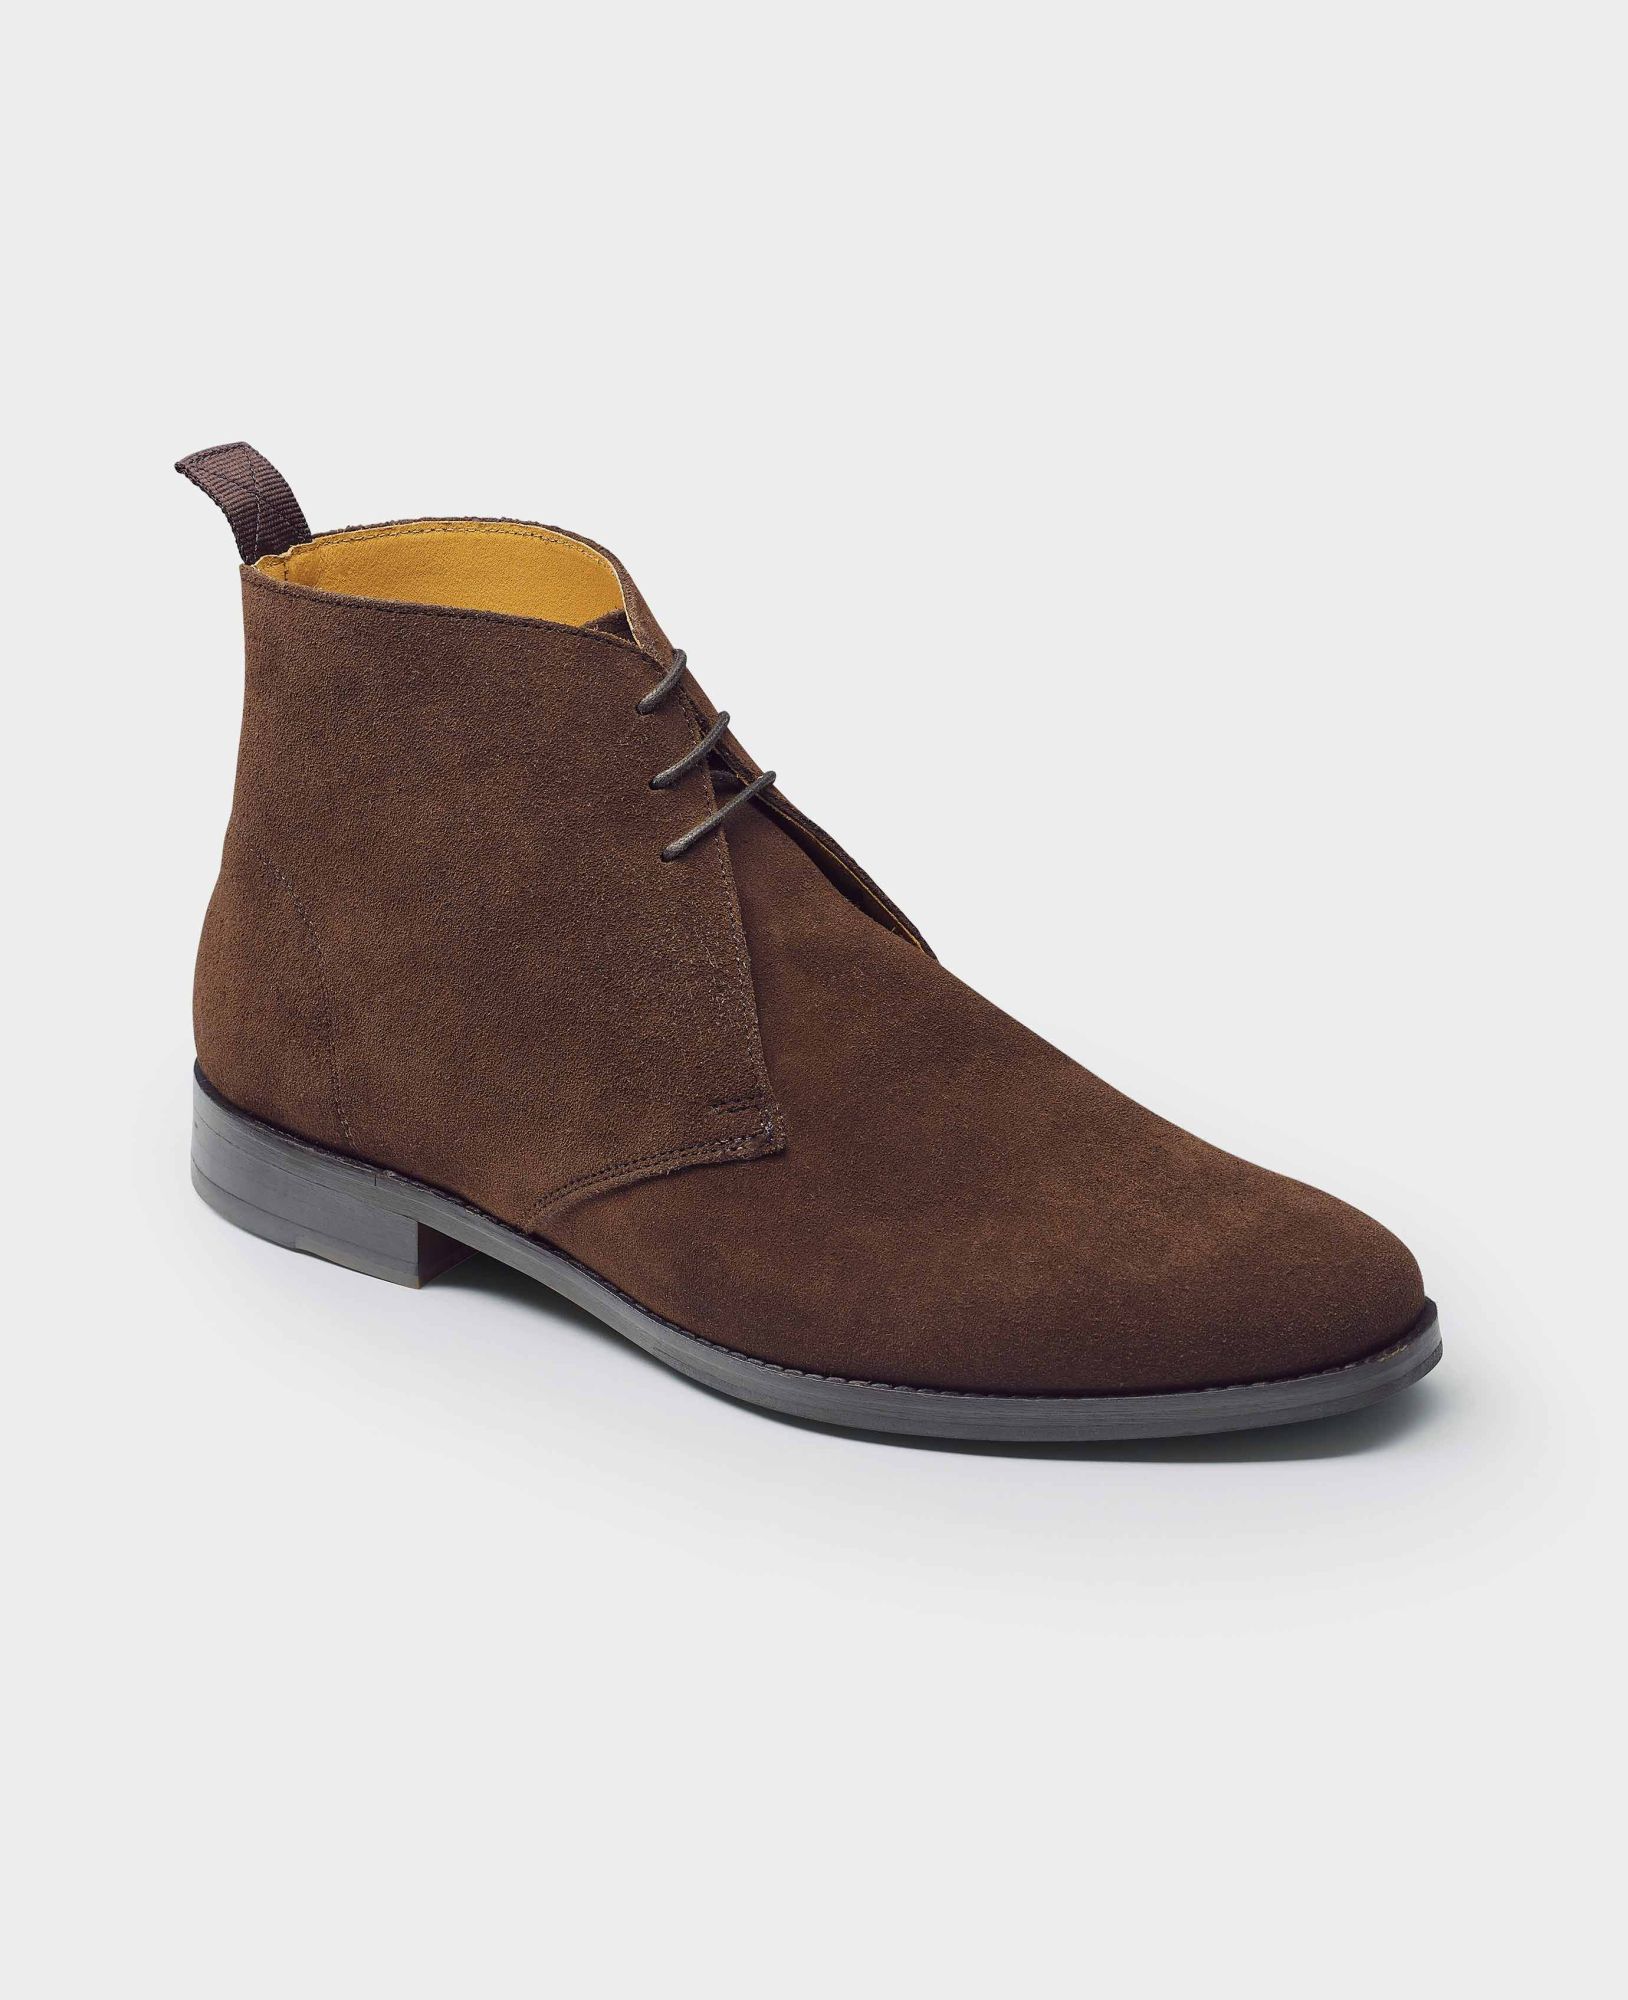 Tan Suede Chelsea Boots 8